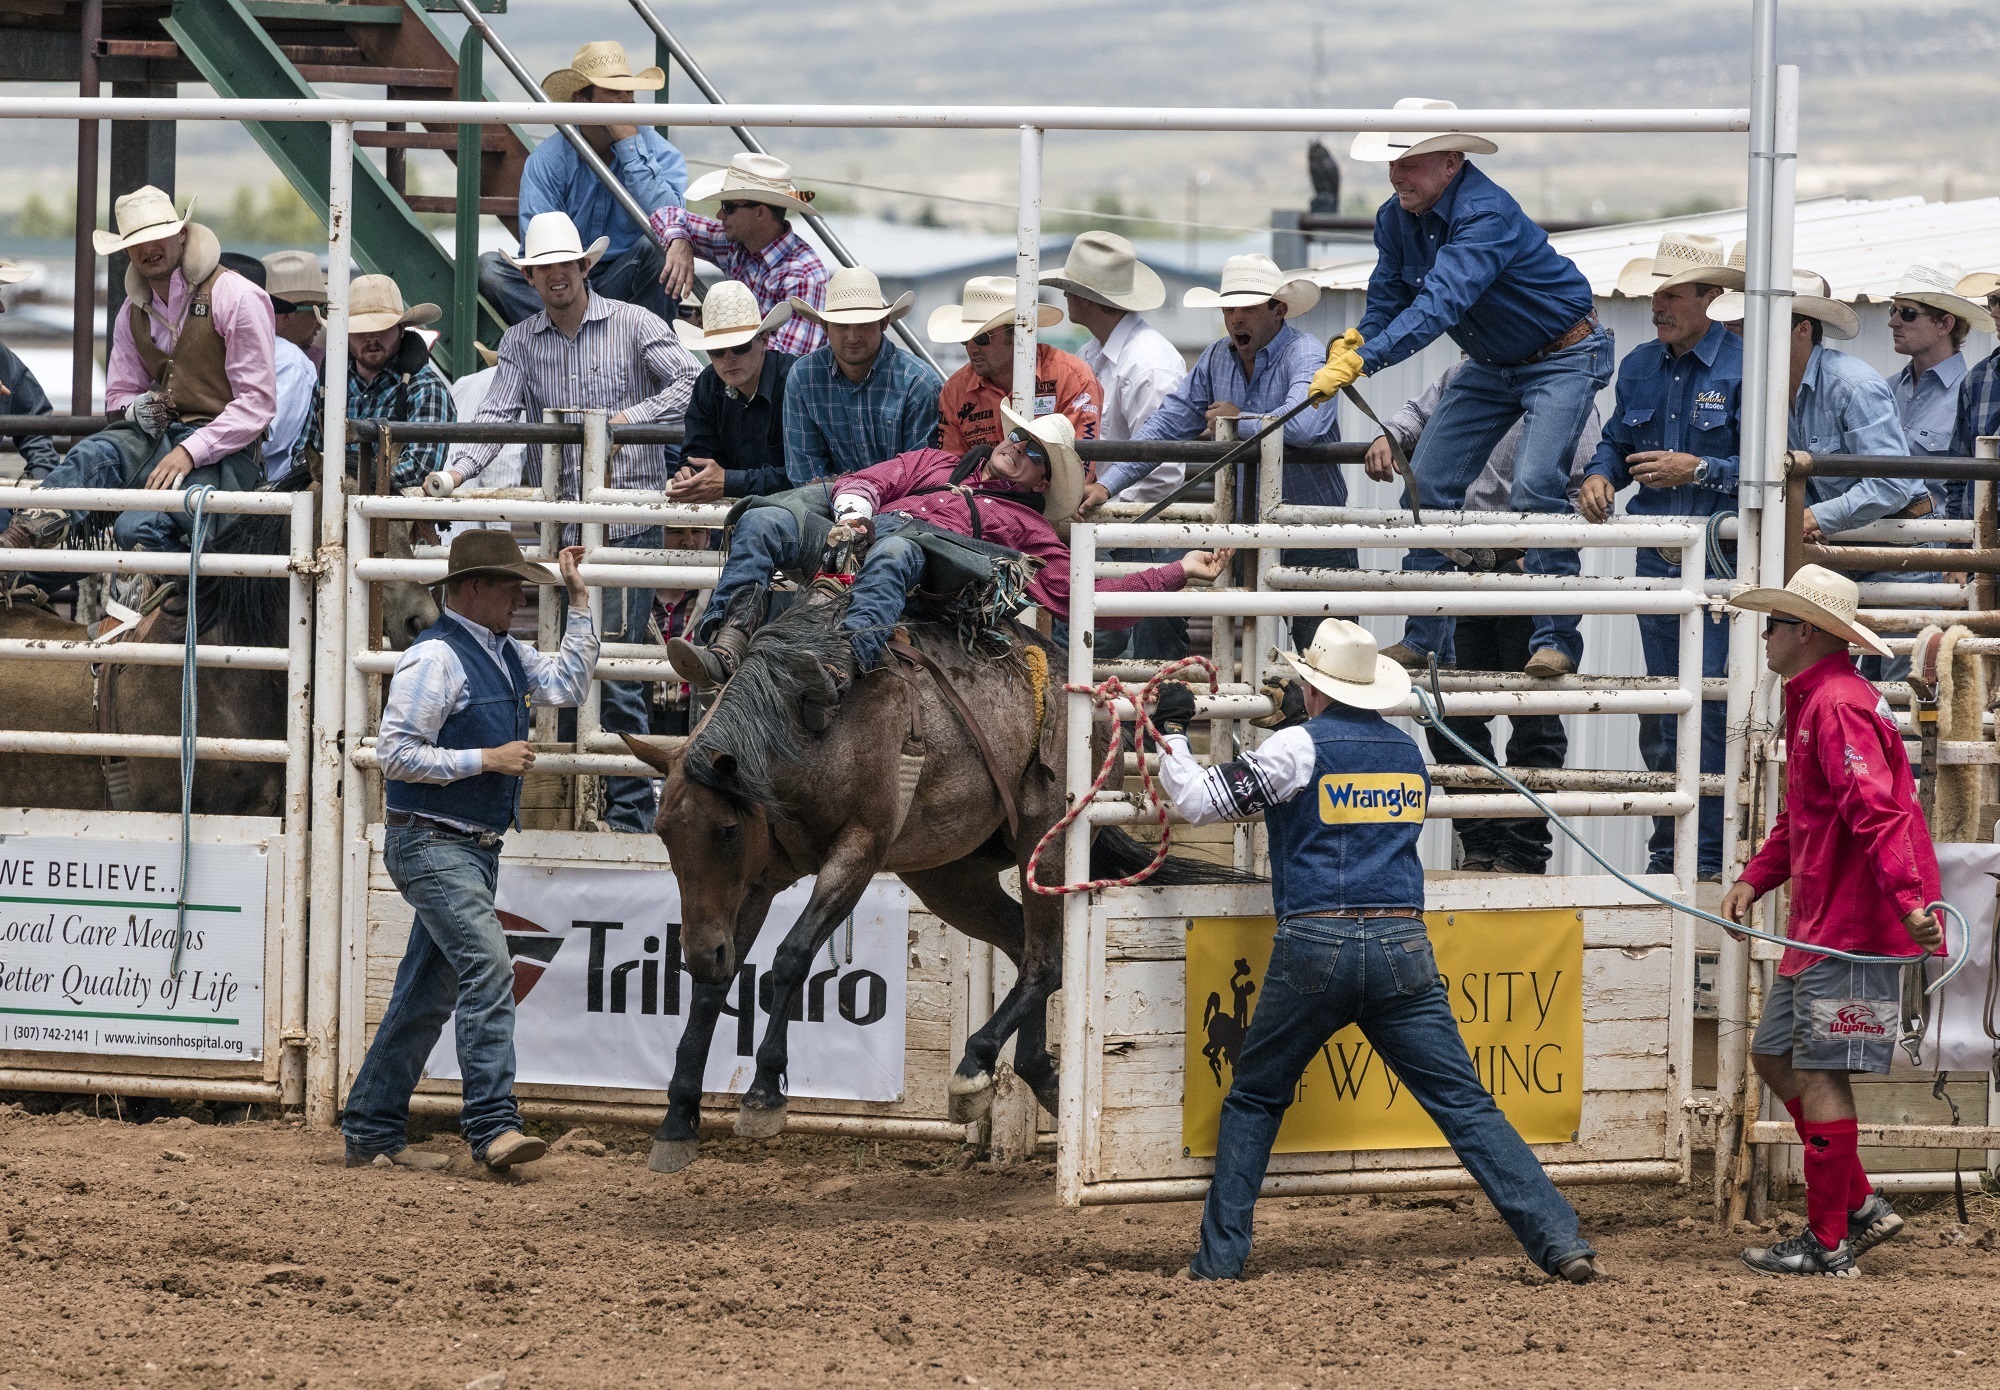 Out of the gate on a bucking bronco at a rodeo by skeeze